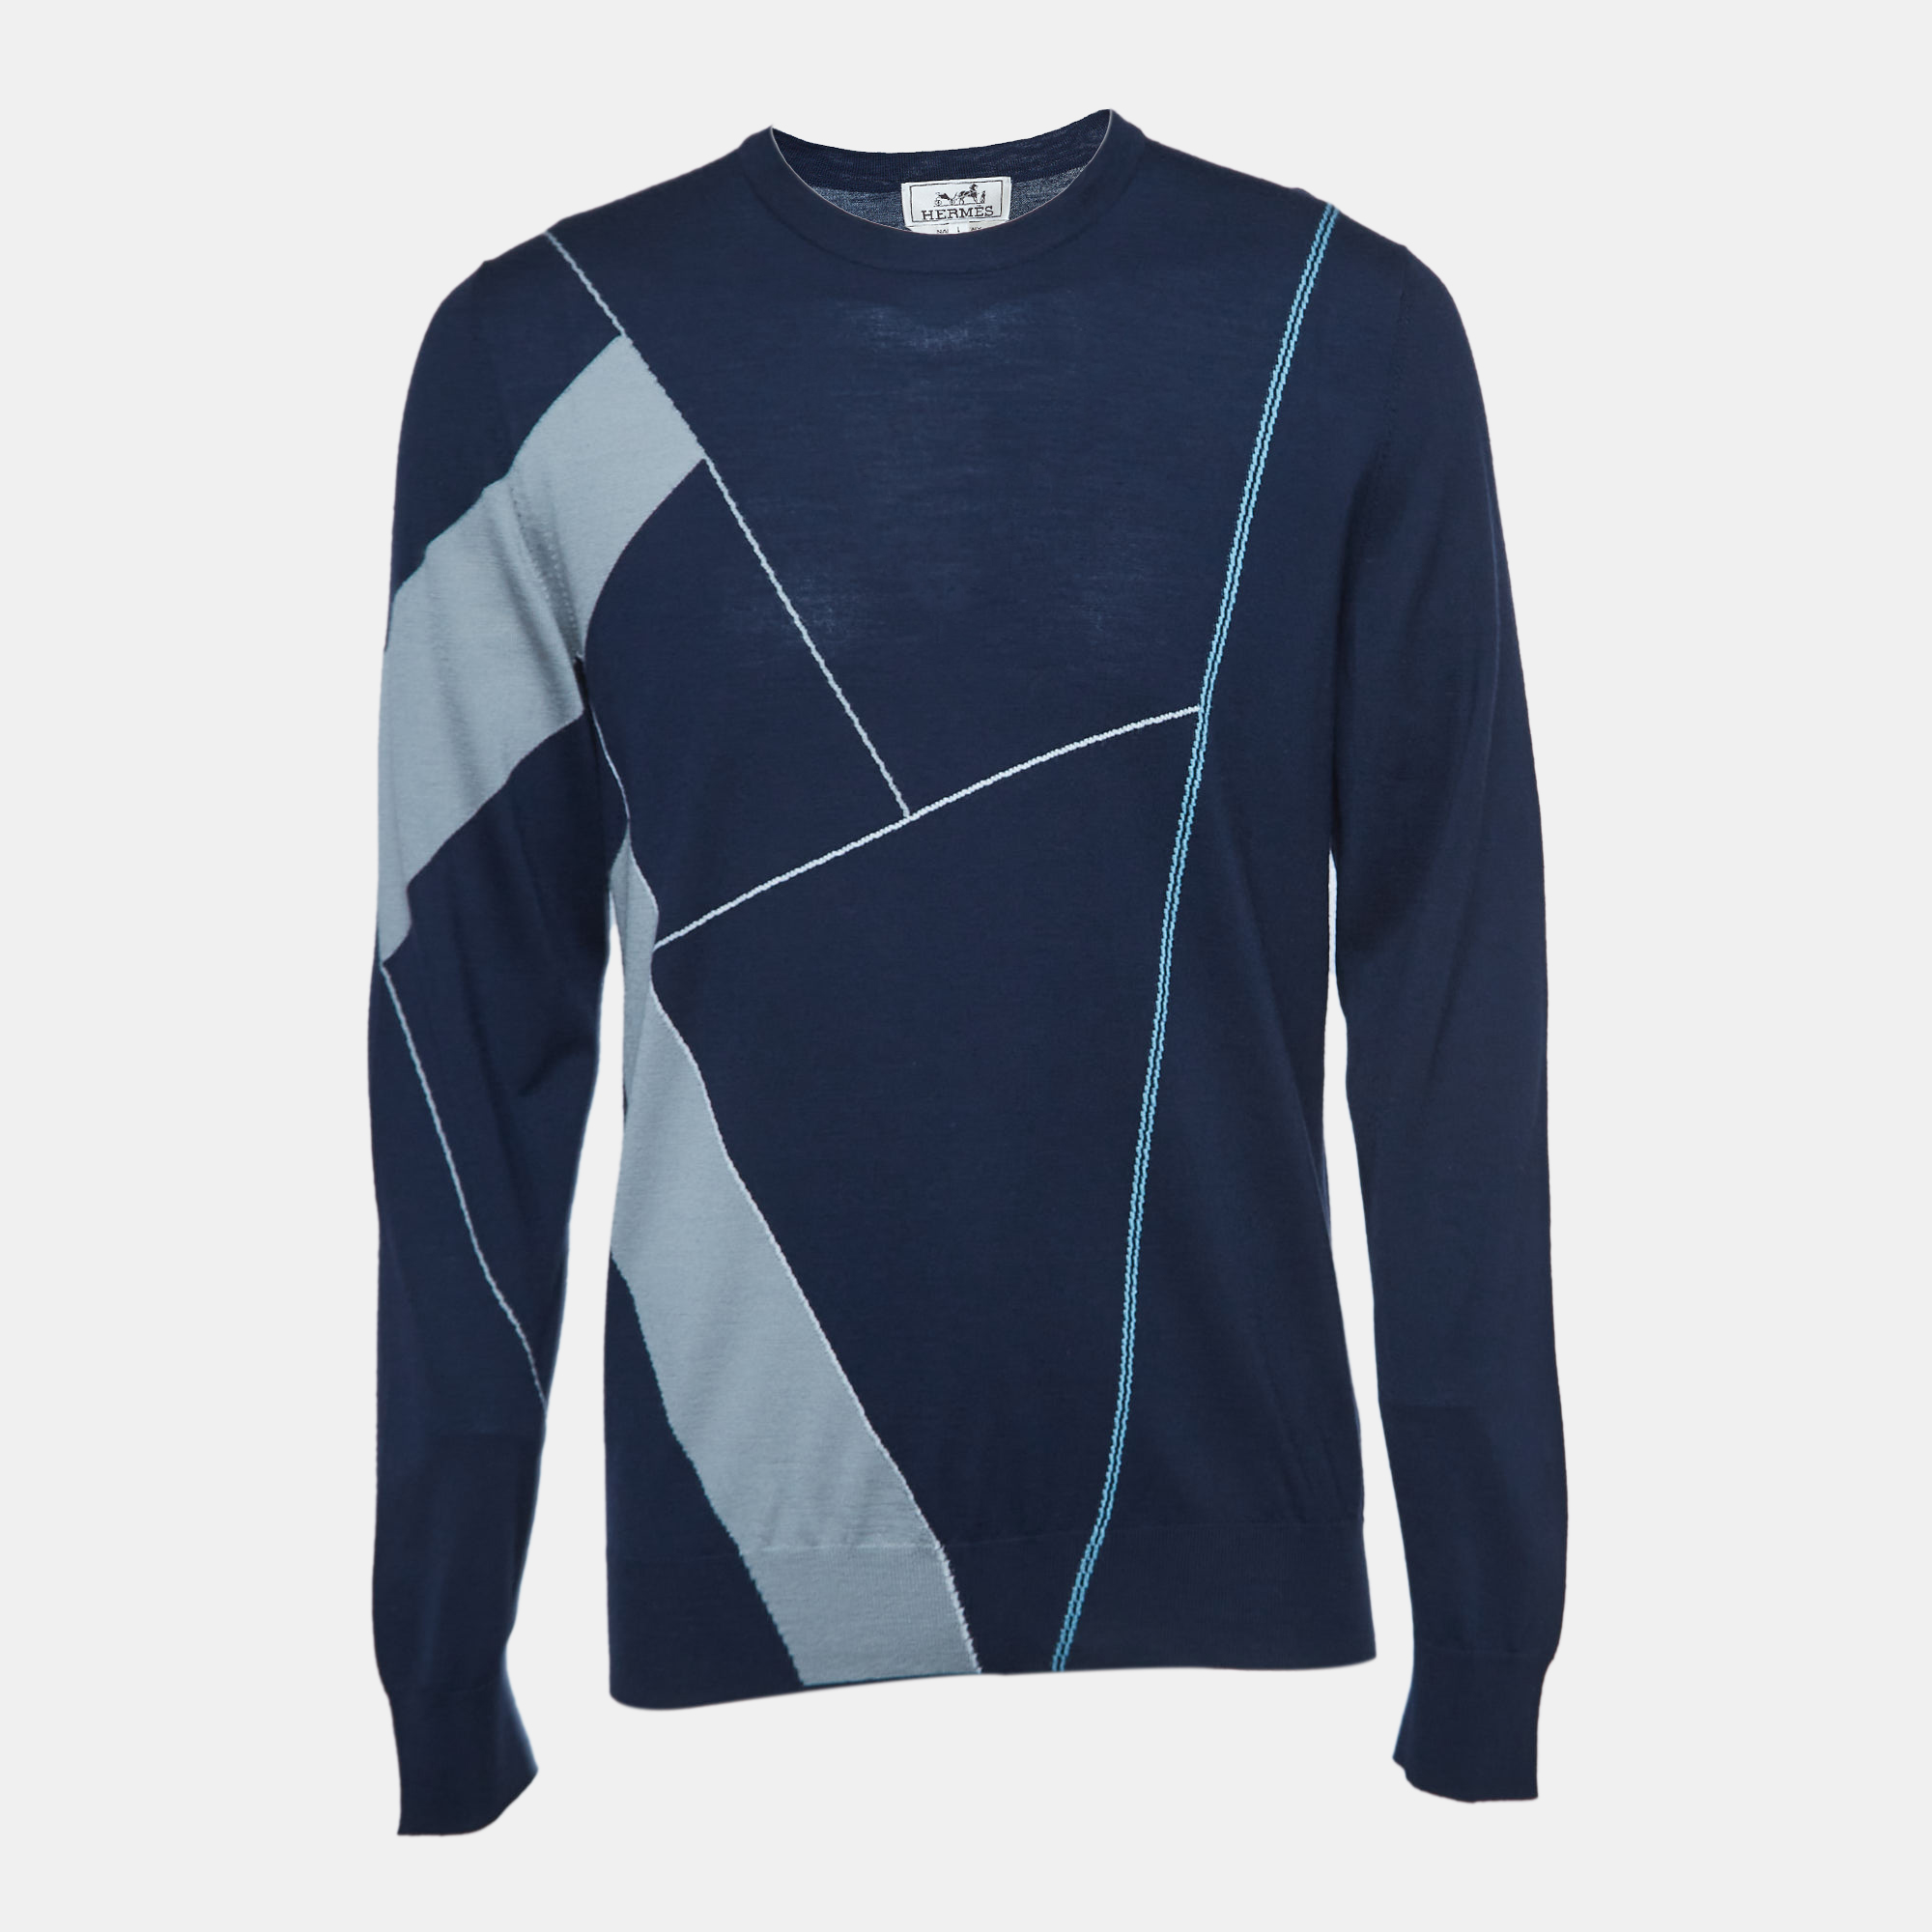 

Hermes Navy Blue Patterned Cashmere and Wool Sweater